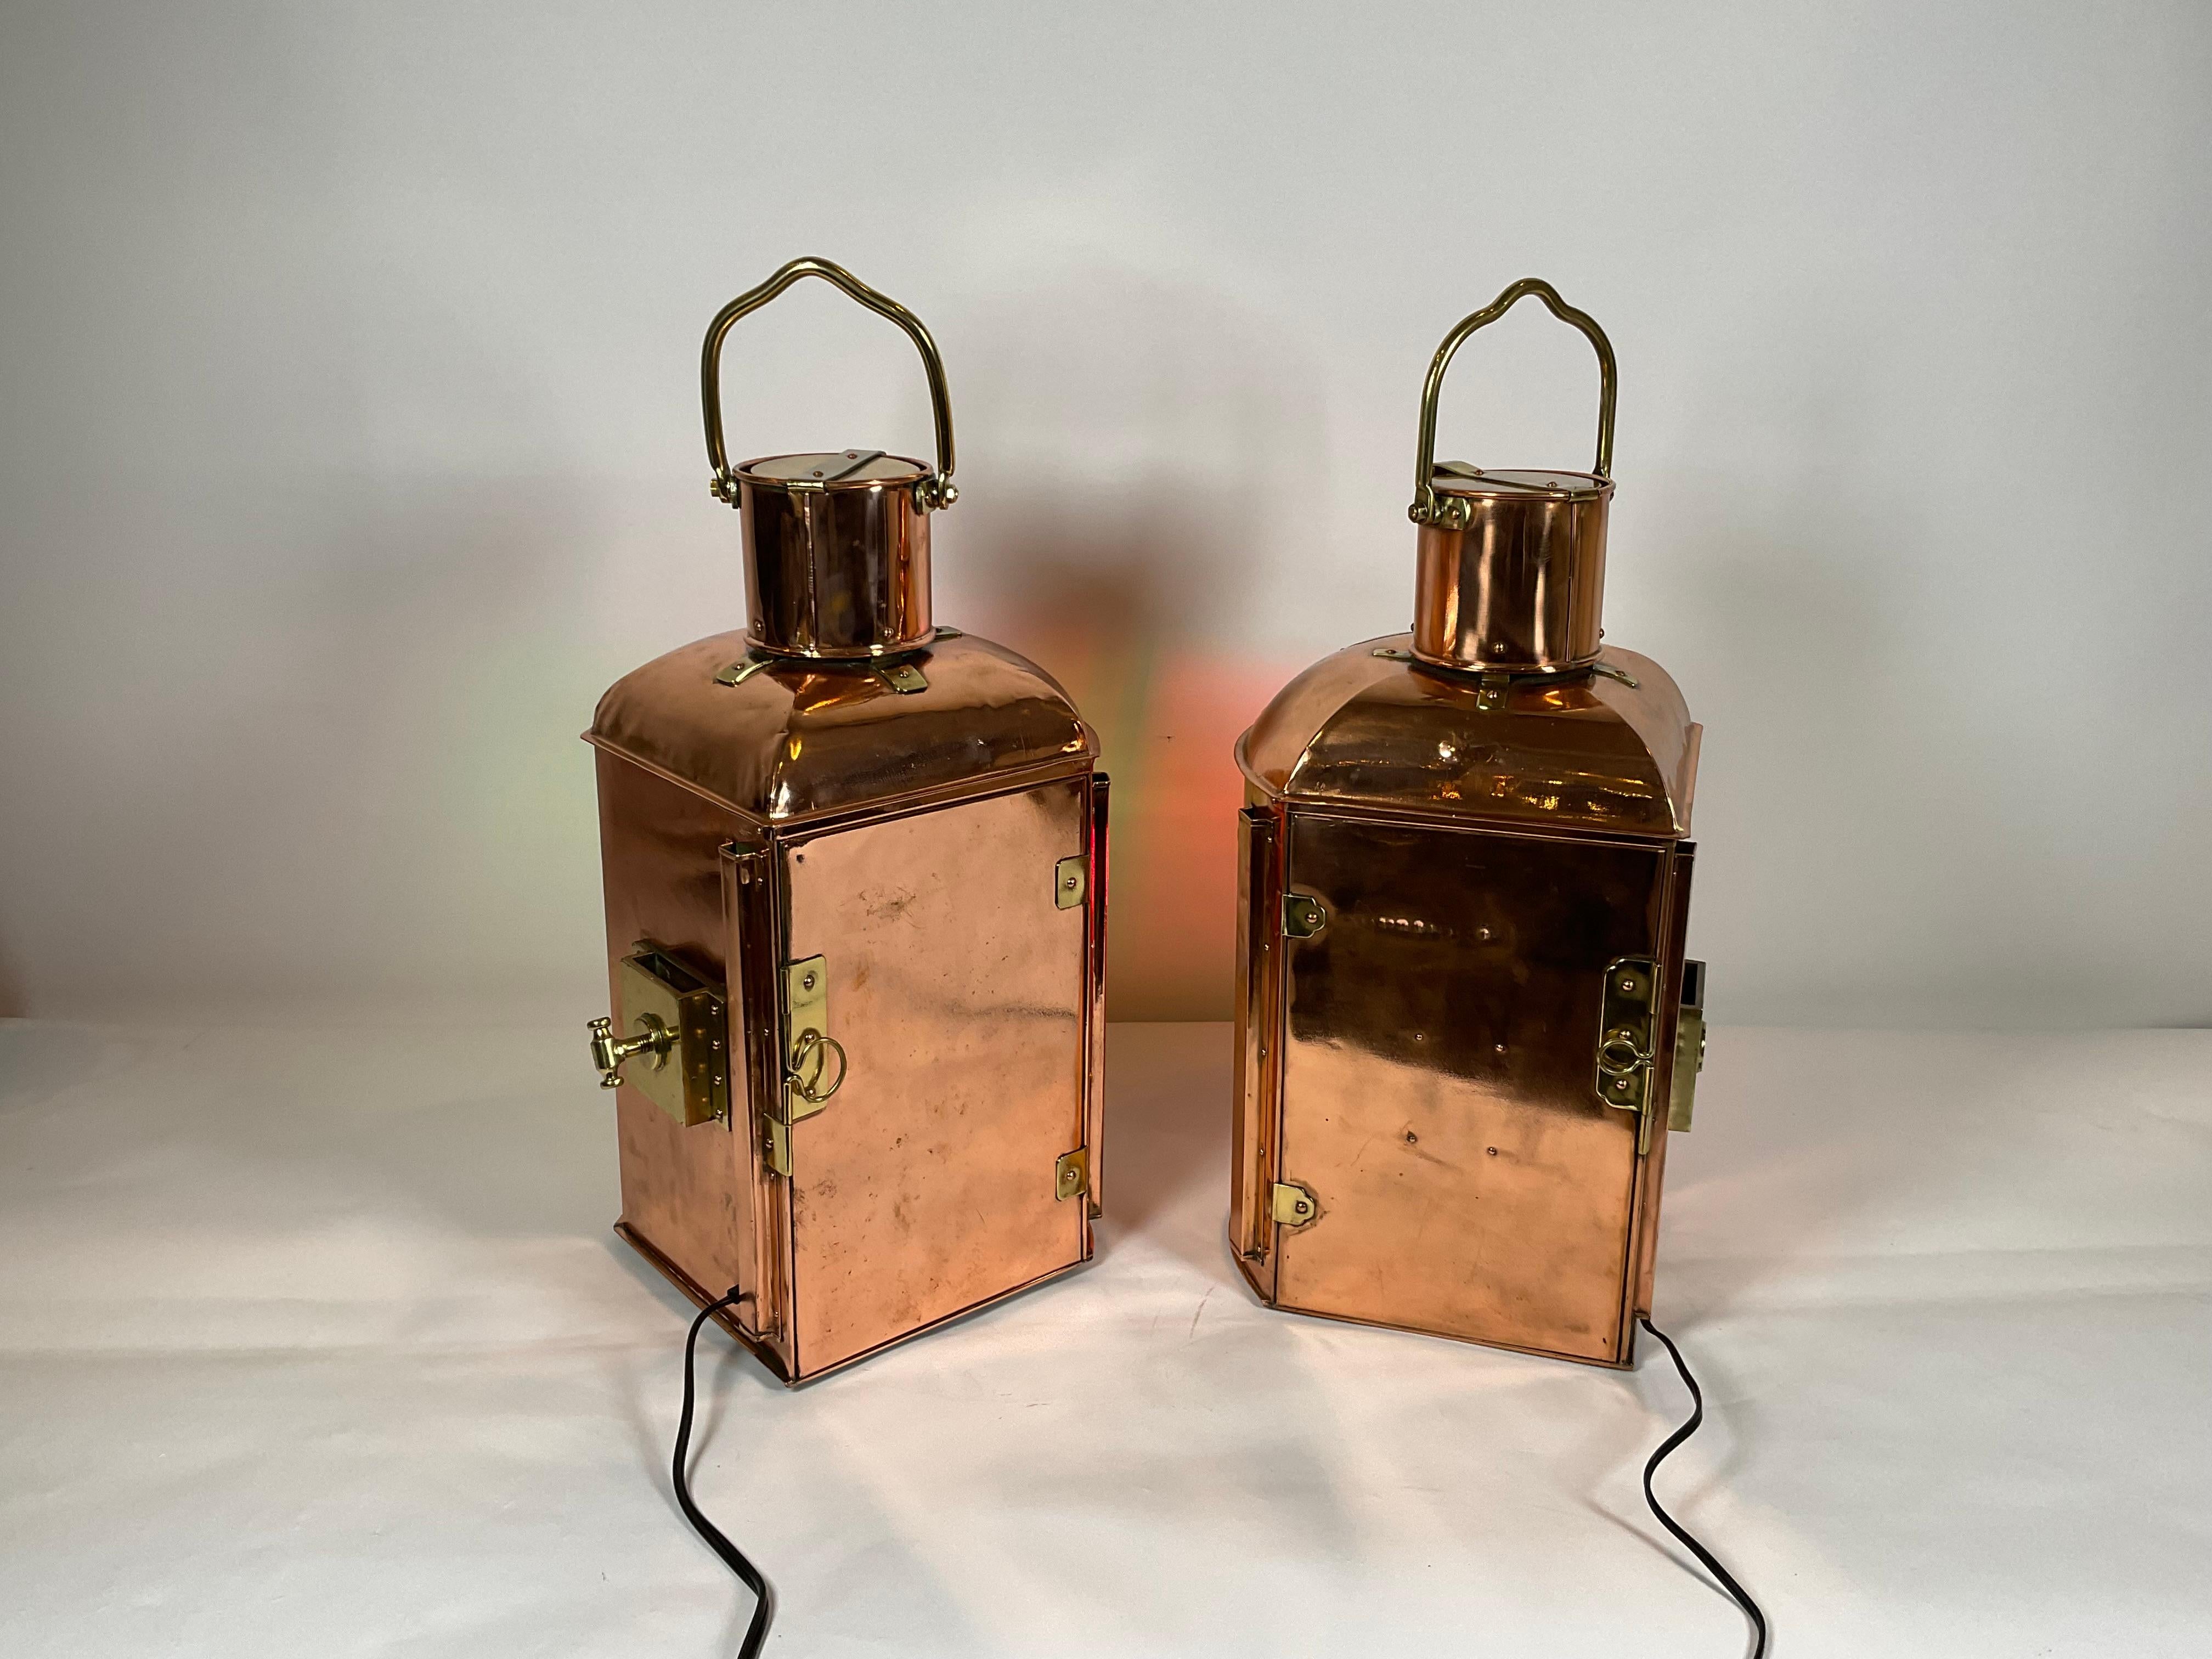 Awesome Pair of Ship’s Port and Starboard Lanterns 1